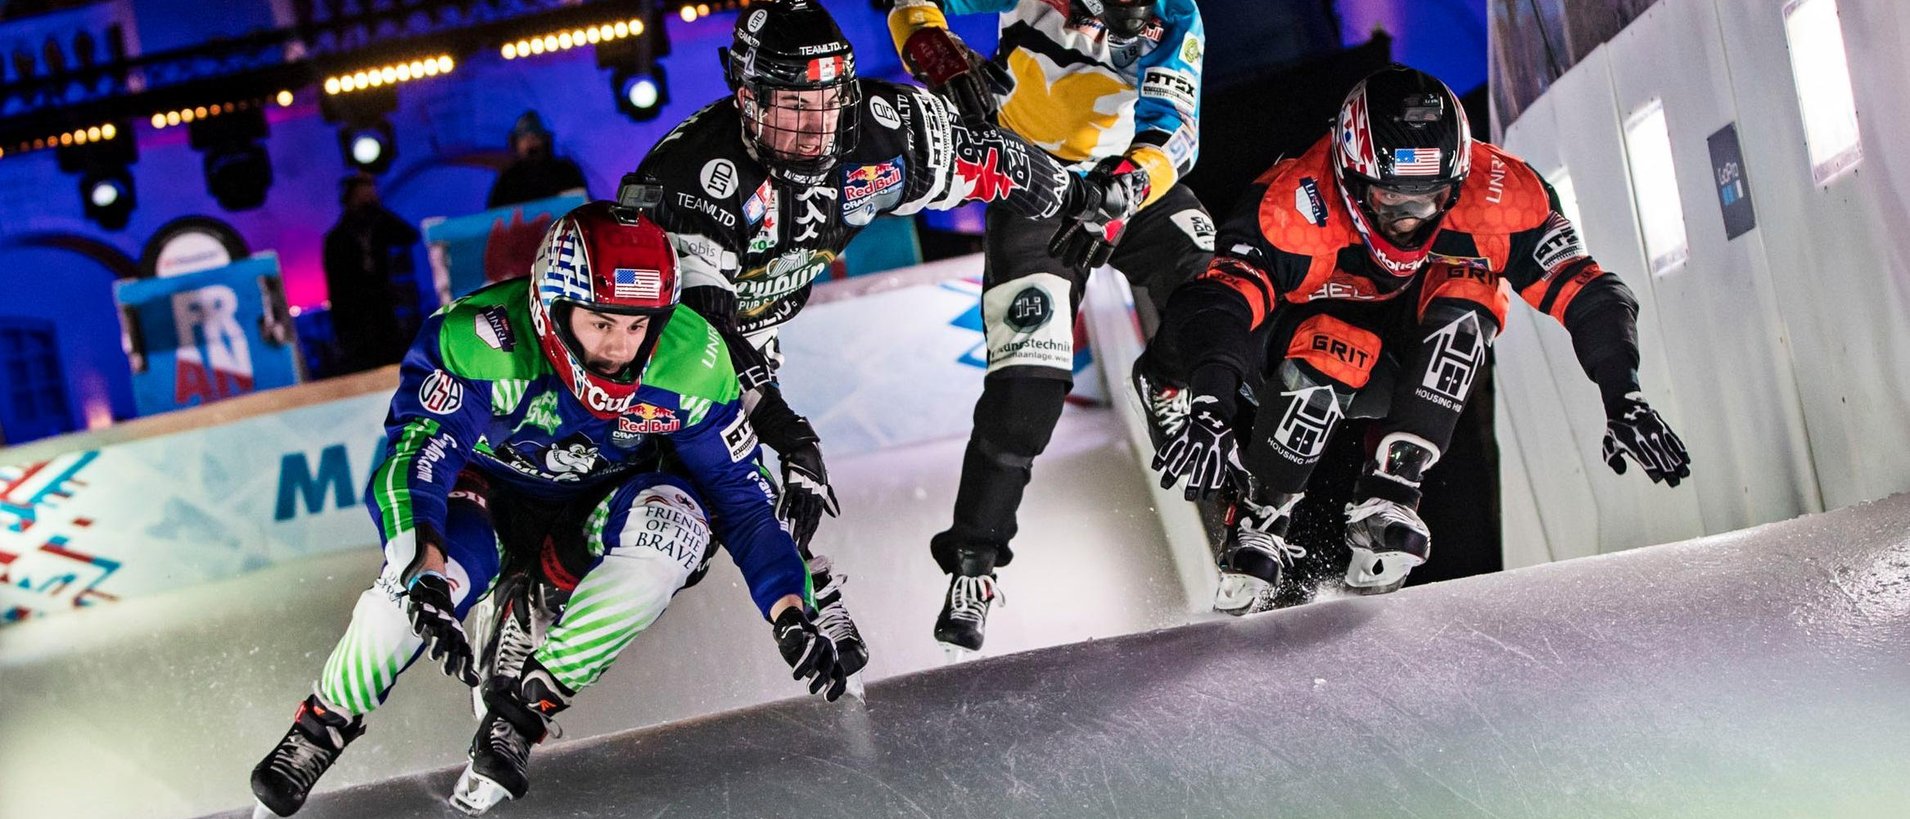 Cameron Naasz of the United States, Maxwell Dunne of the United States, Scott Croxall of Canada and Marco Dallago of Austria compete during the finals at the first stage of the ATSX Ice Cross Downhill World Championship at the Red Bull Crashed Ice in Marseille, France on January 14, 2017.